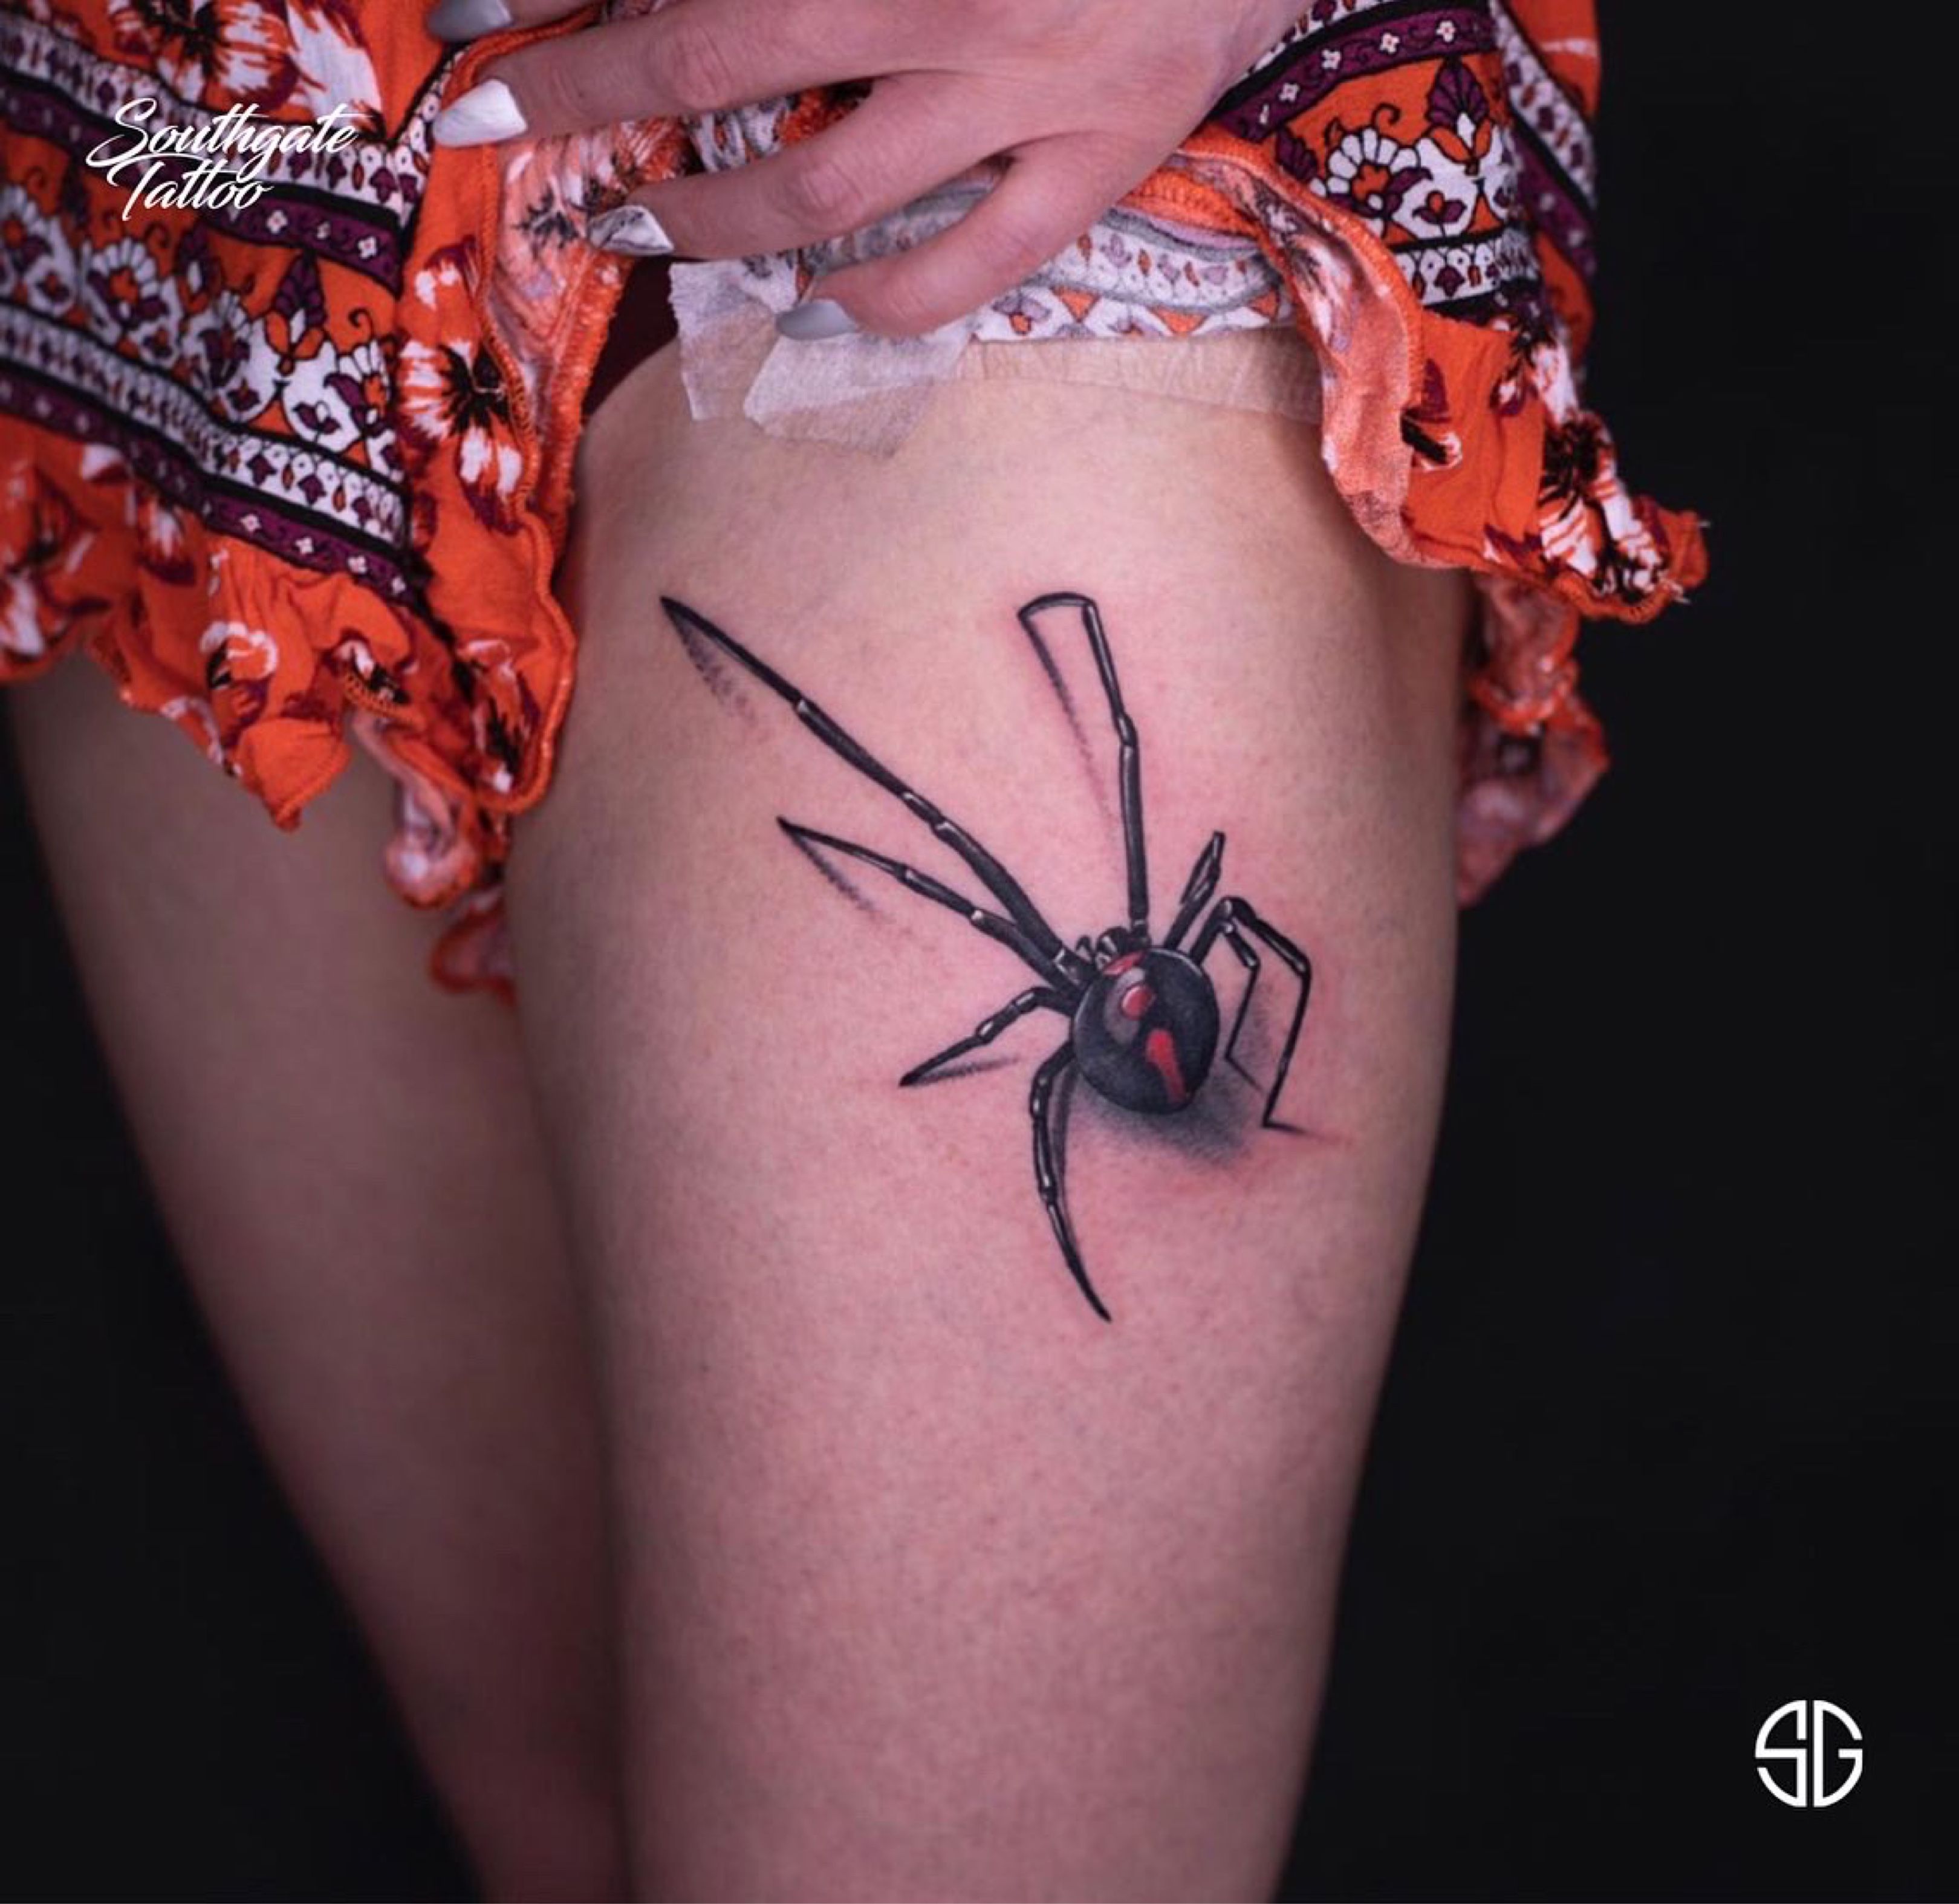 PARMANENT Spiderman suite TATTOO 😯 - YouTube